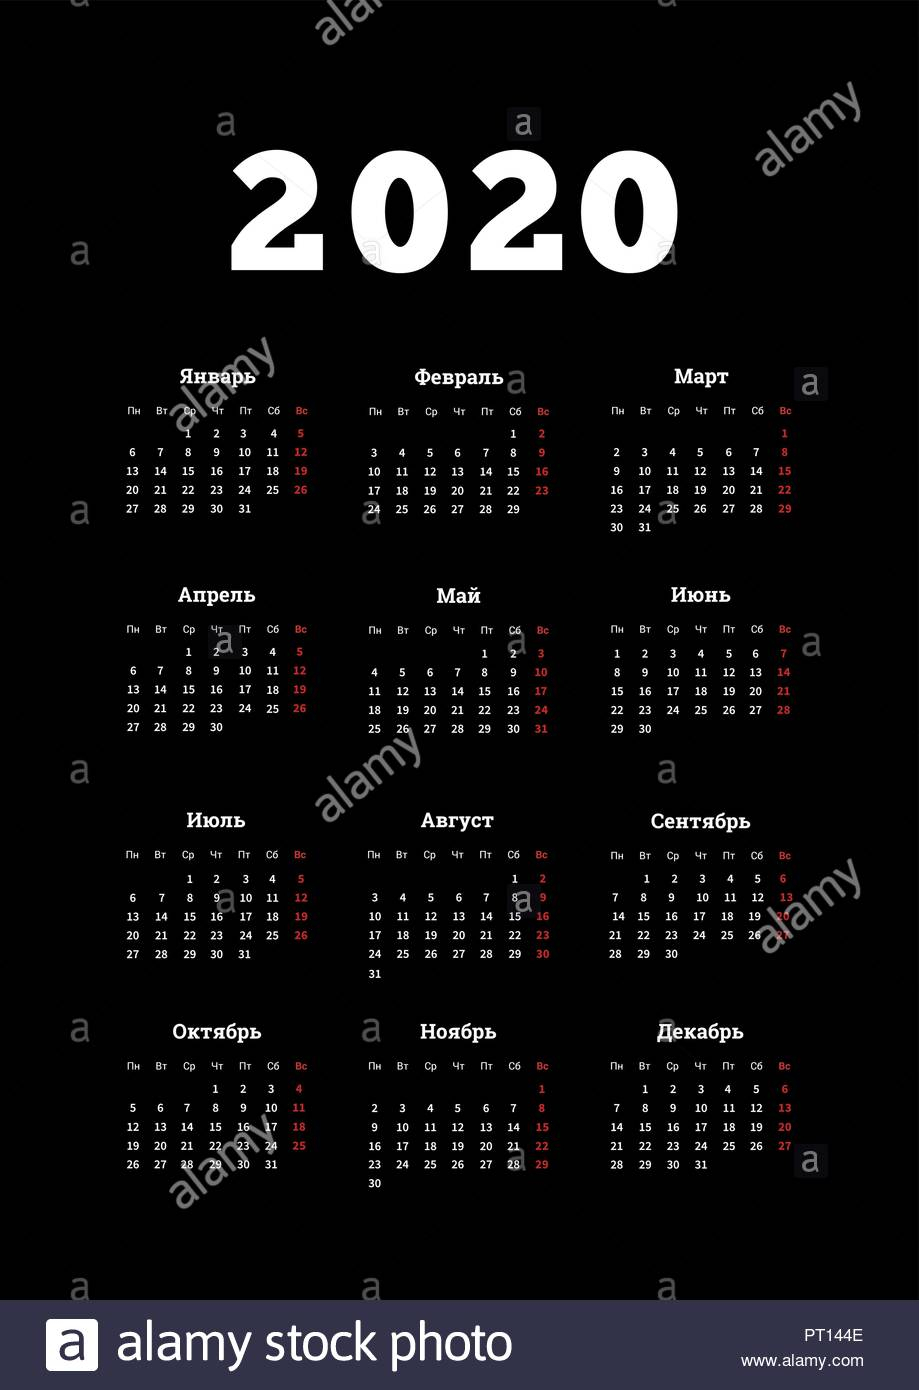 2020 Year Simple Calendar On Russian Language, A4 Size